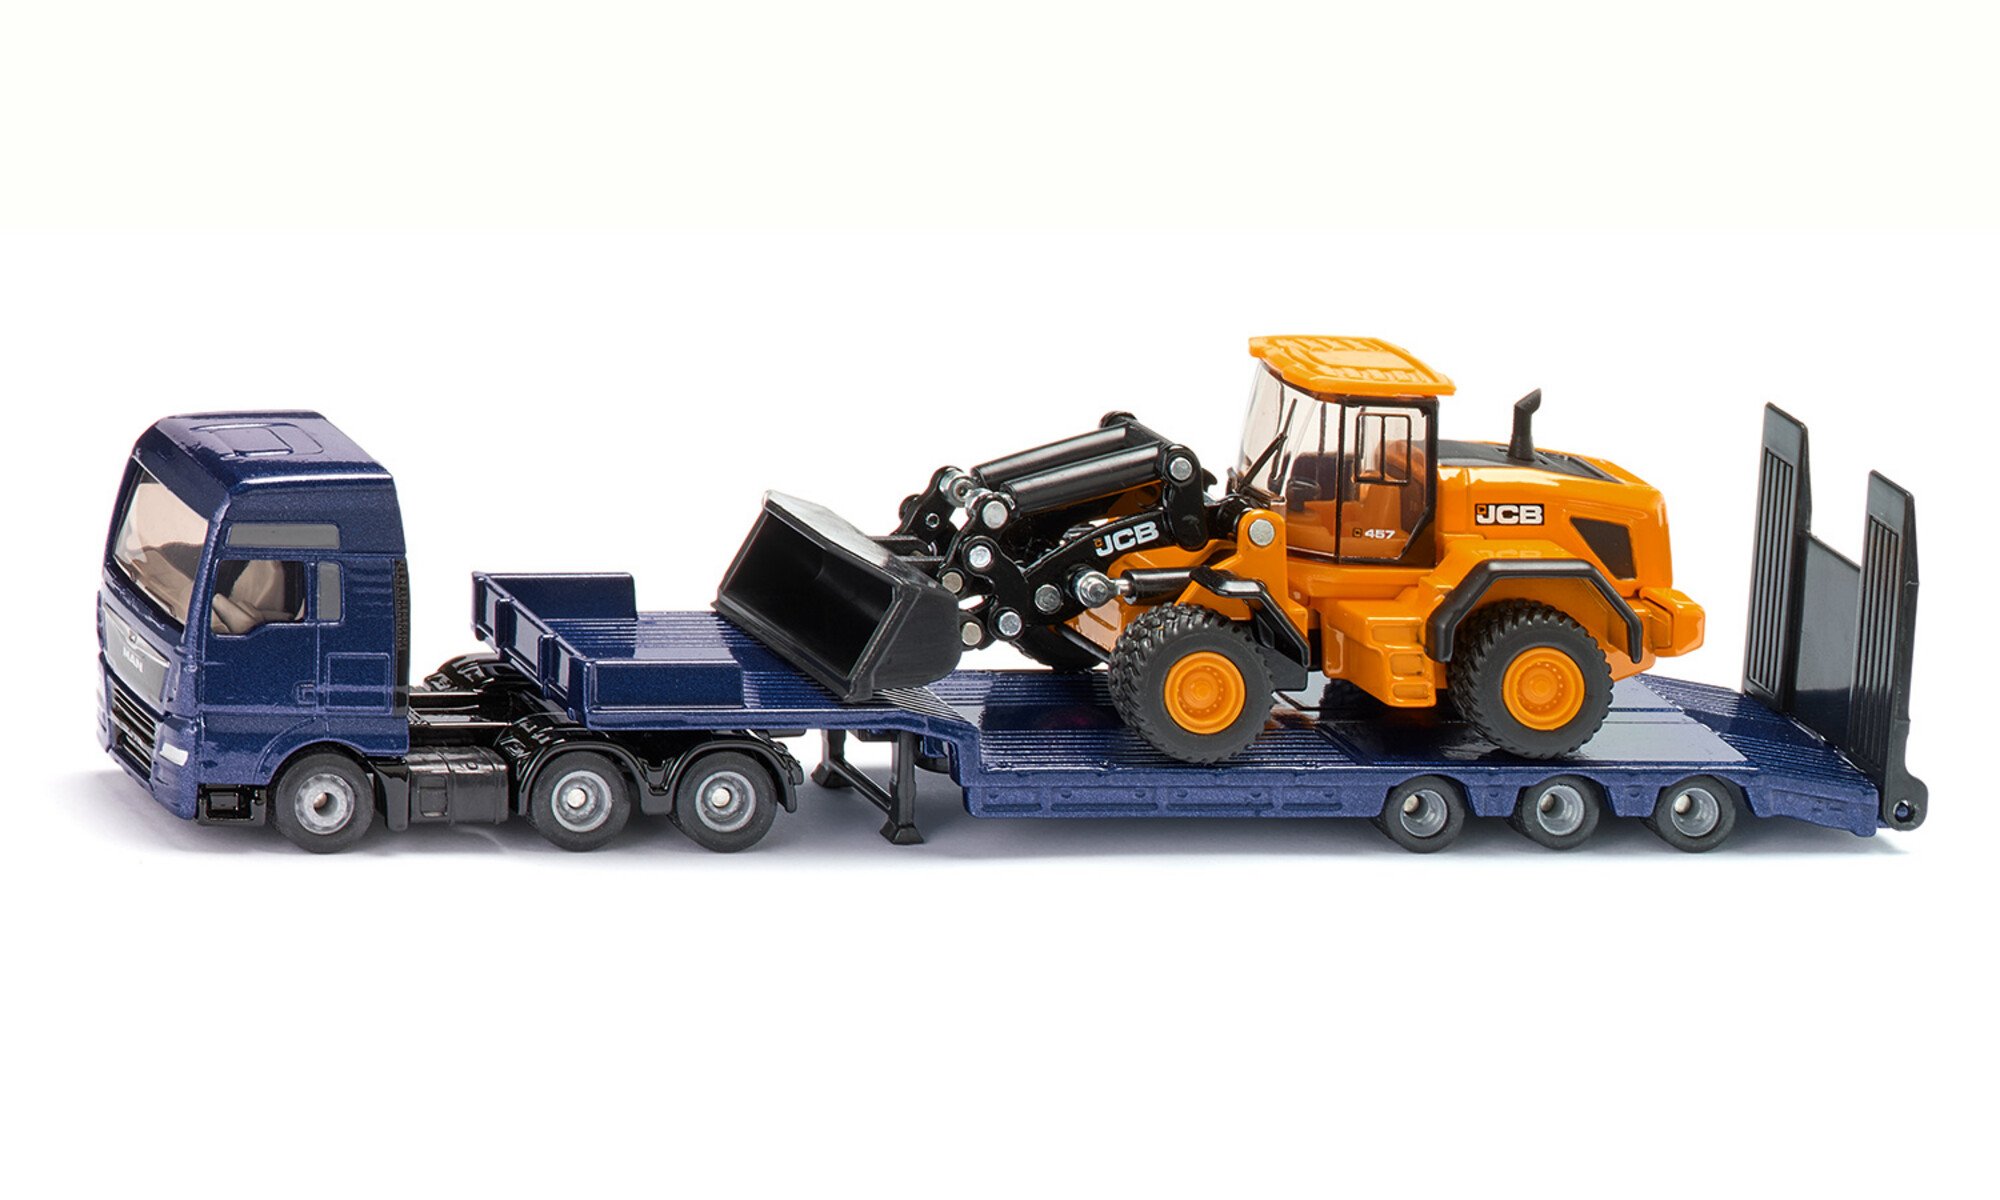 MAN truck with low loader and JCB wheel loader